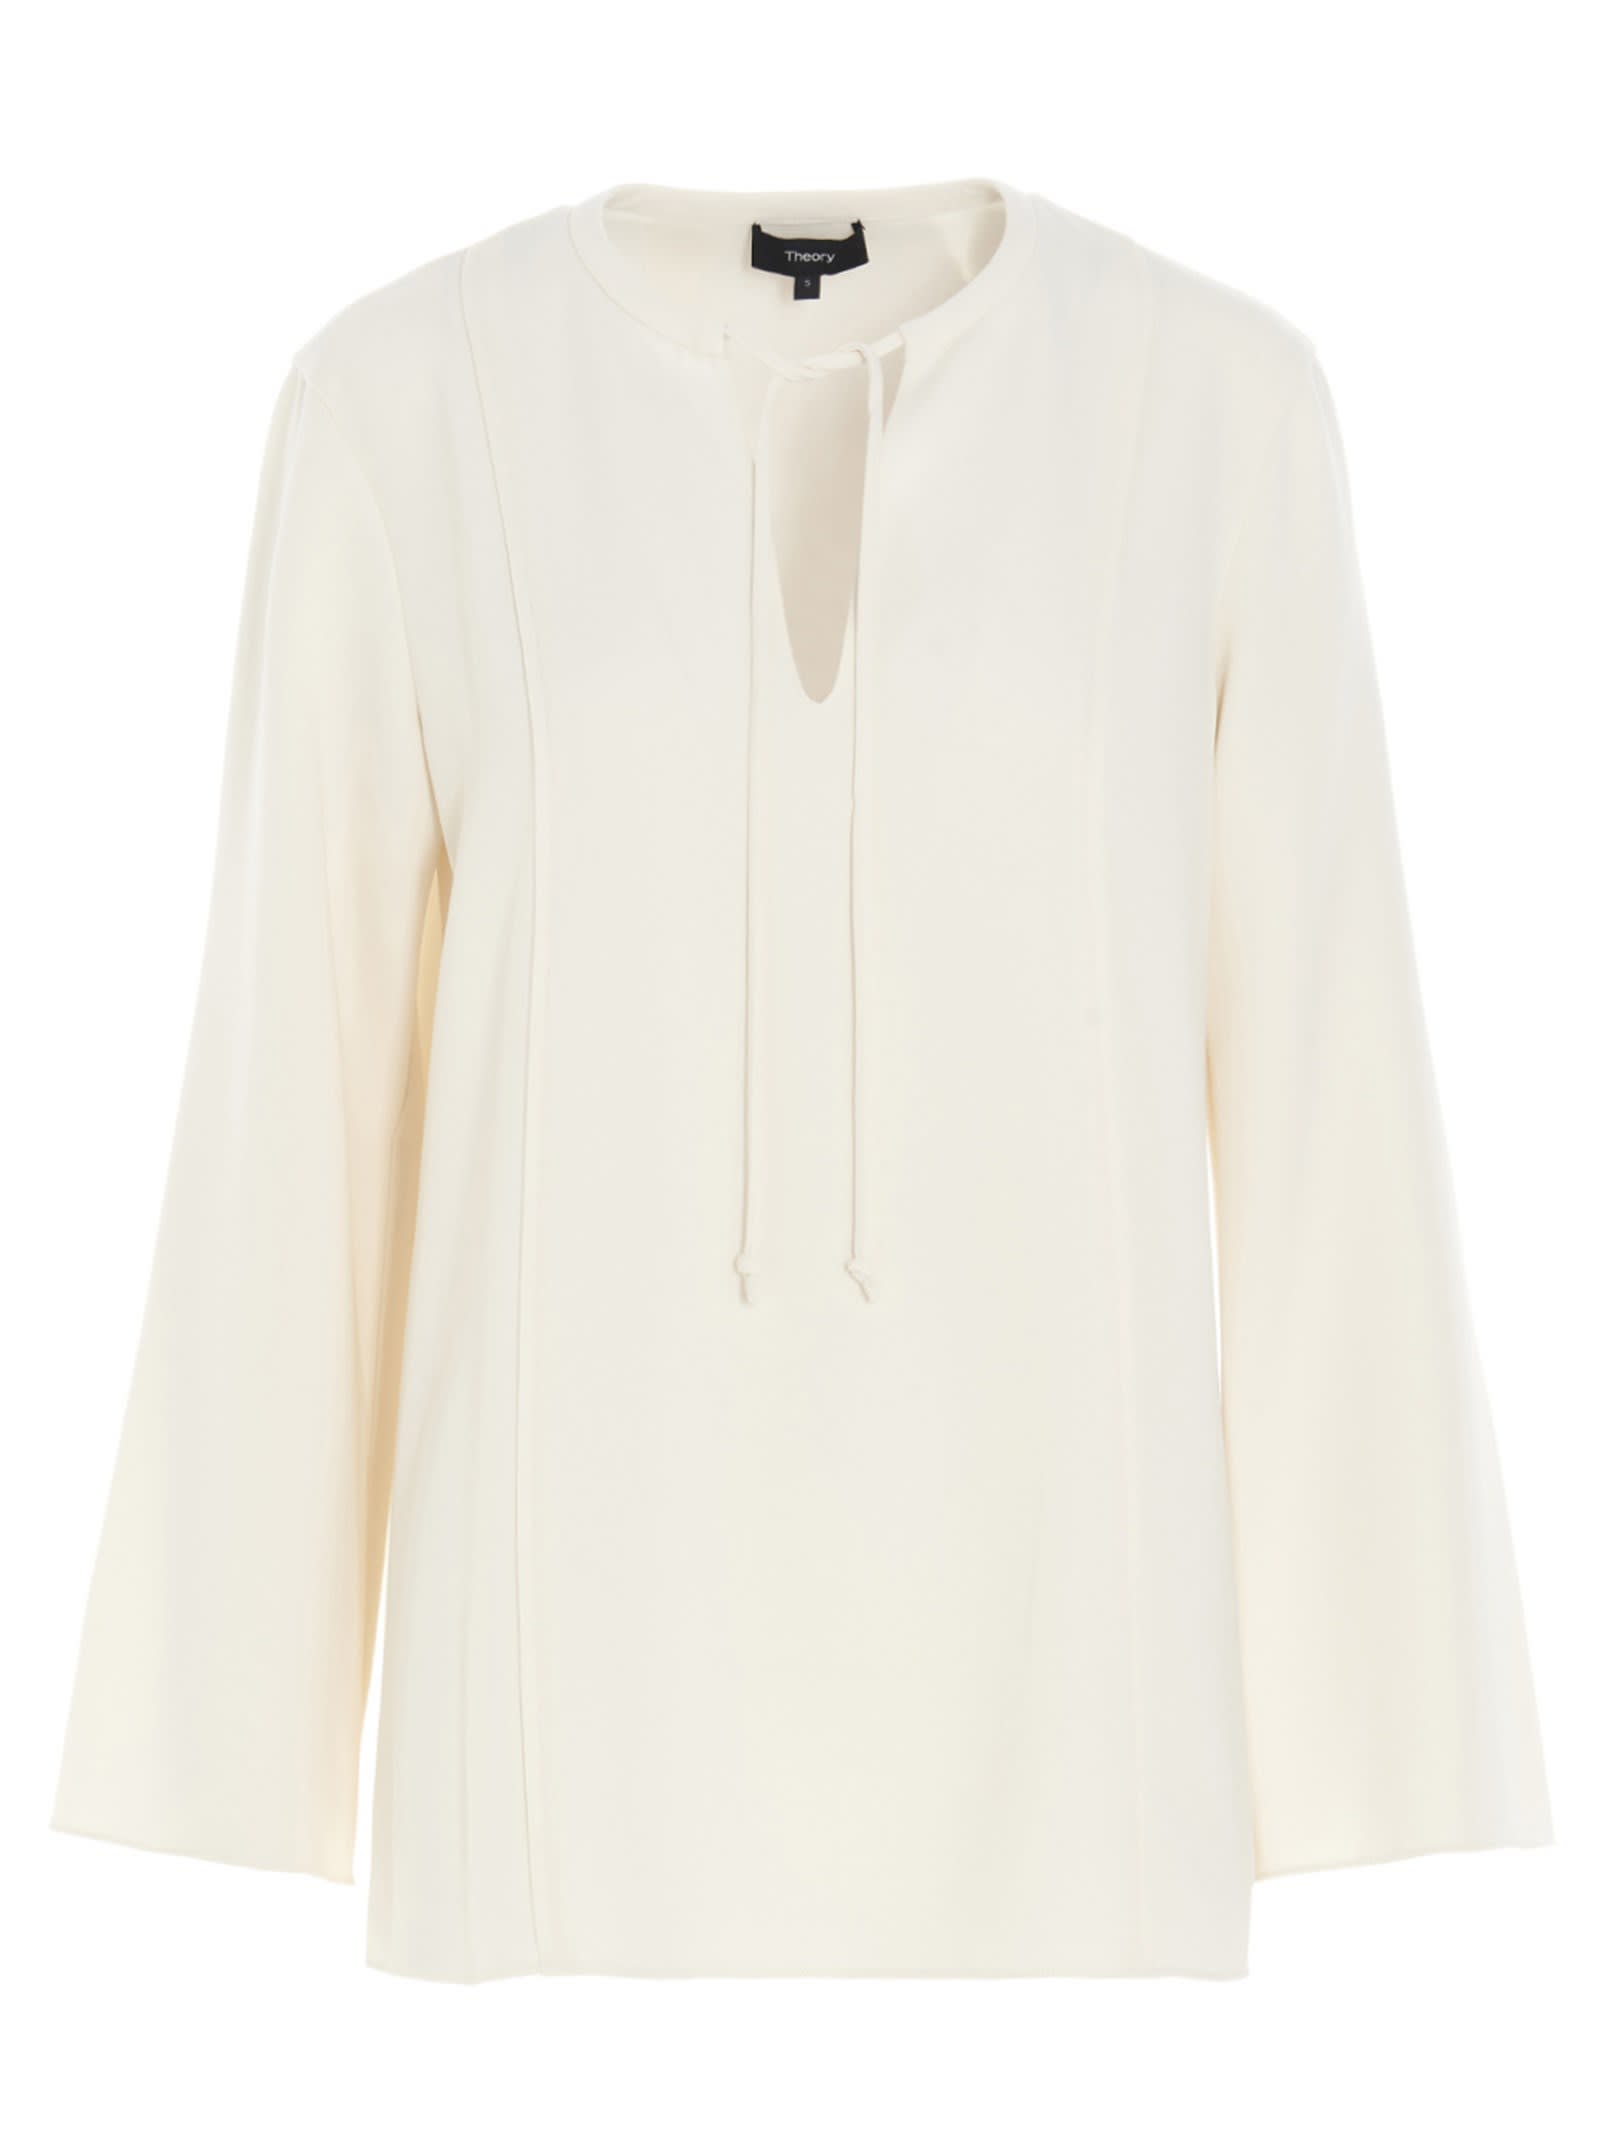 Theory Blouse With Lace Around The Collar